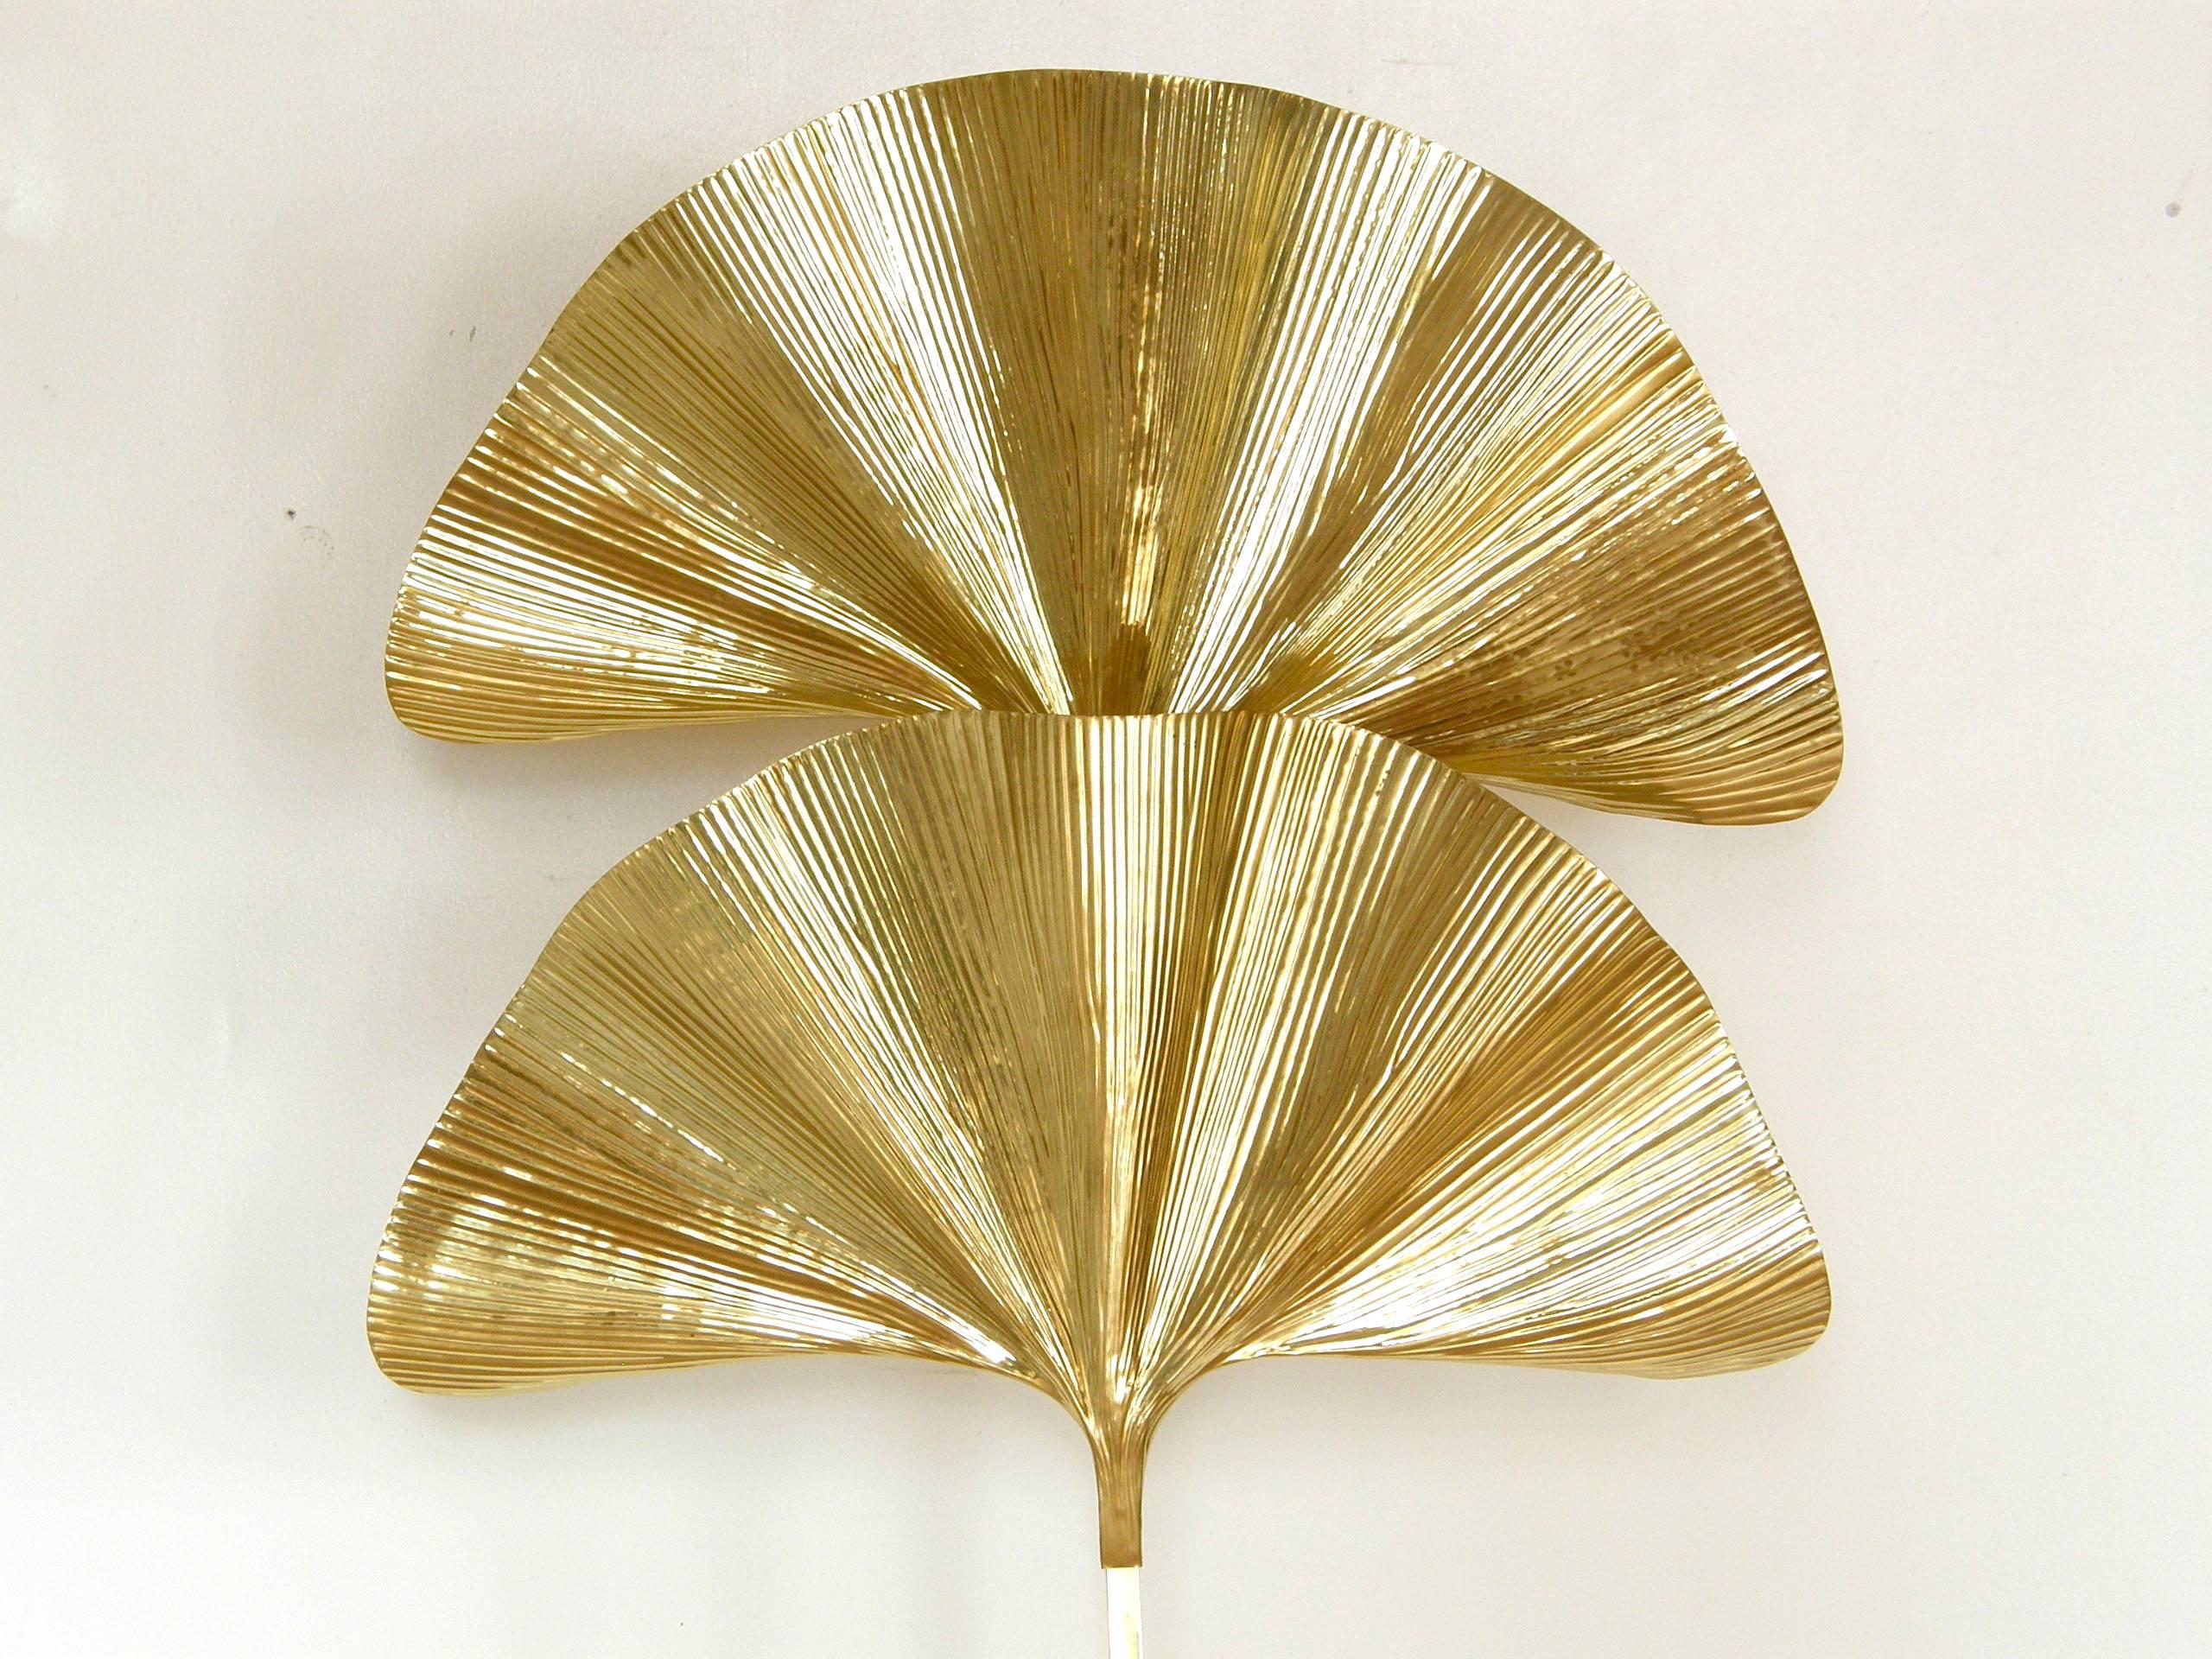 Brass floor lamp with ginkgo leaf shaped shades, designed by Tommaso Barbi. The lamp provides a unique, atmospheric light reflected off the undulating shades.

Please contact us if you have any questions.